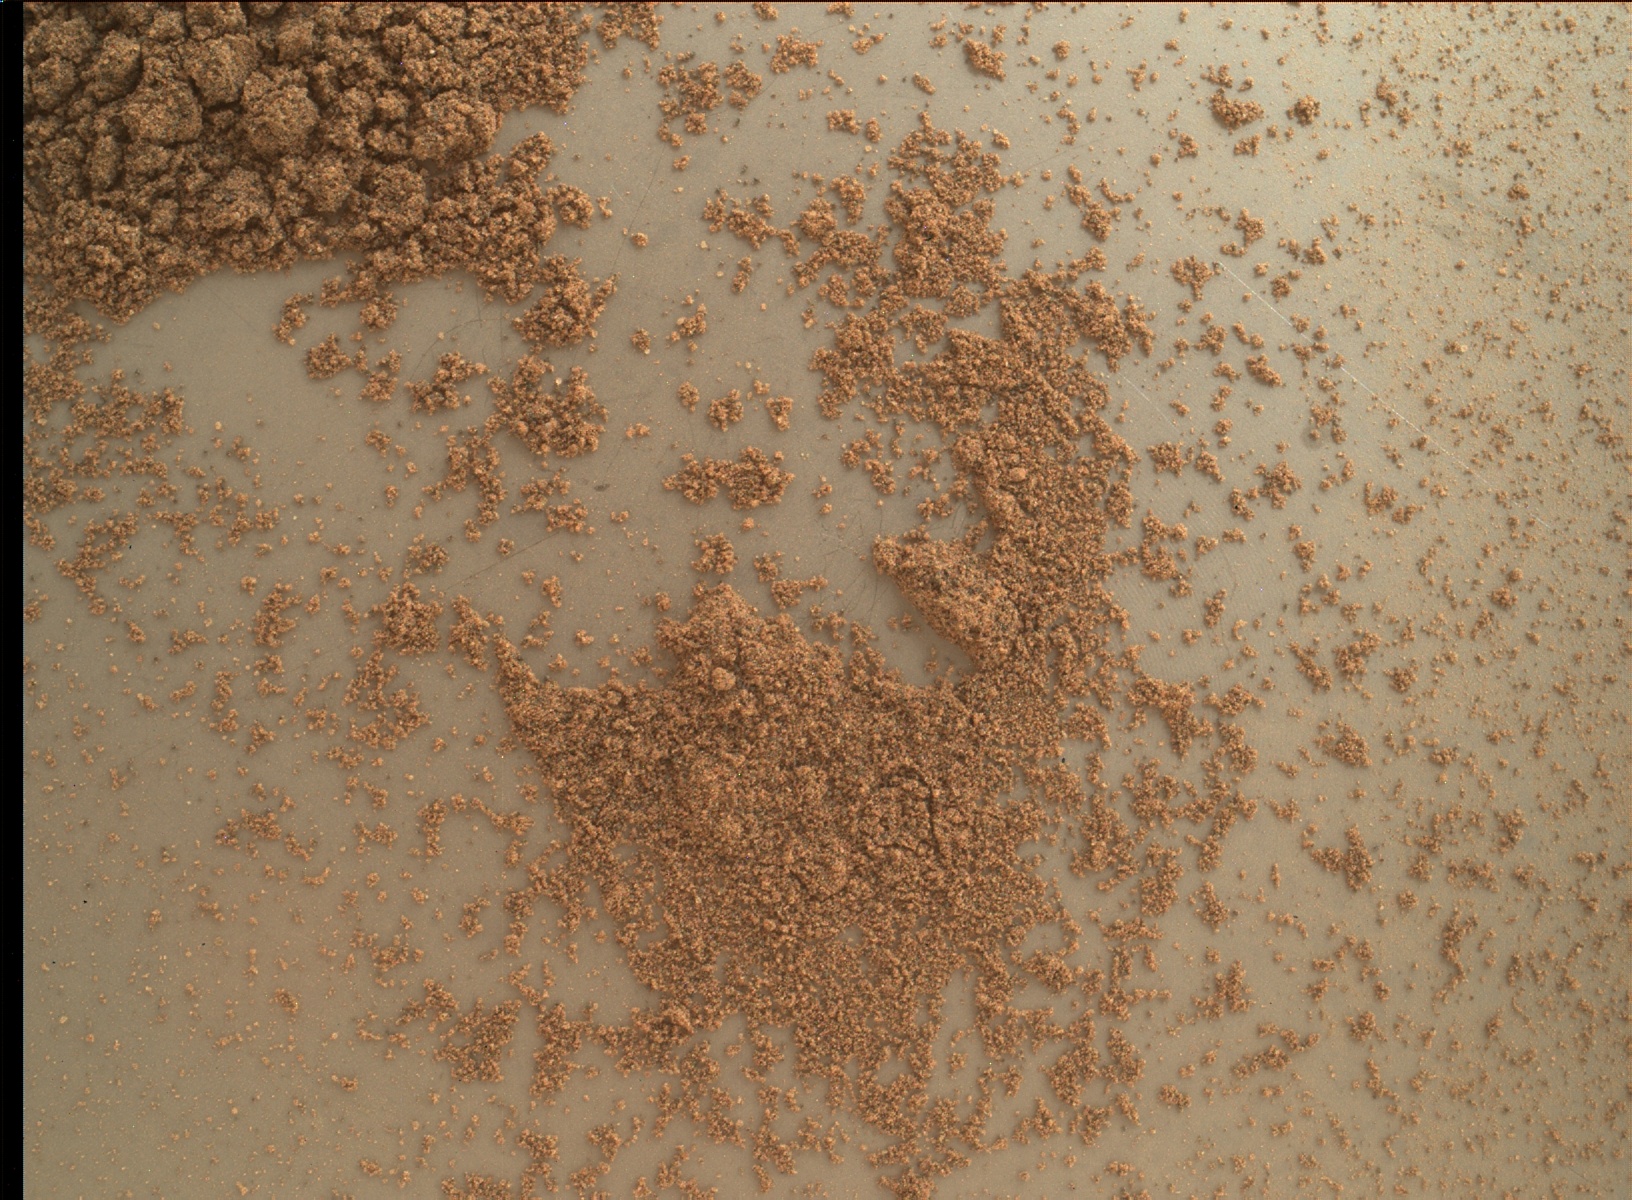 Nasa's Mars rover Curiosity acquired this image using its Mars Hand Lens Imager (MAHLI) on Sol 95